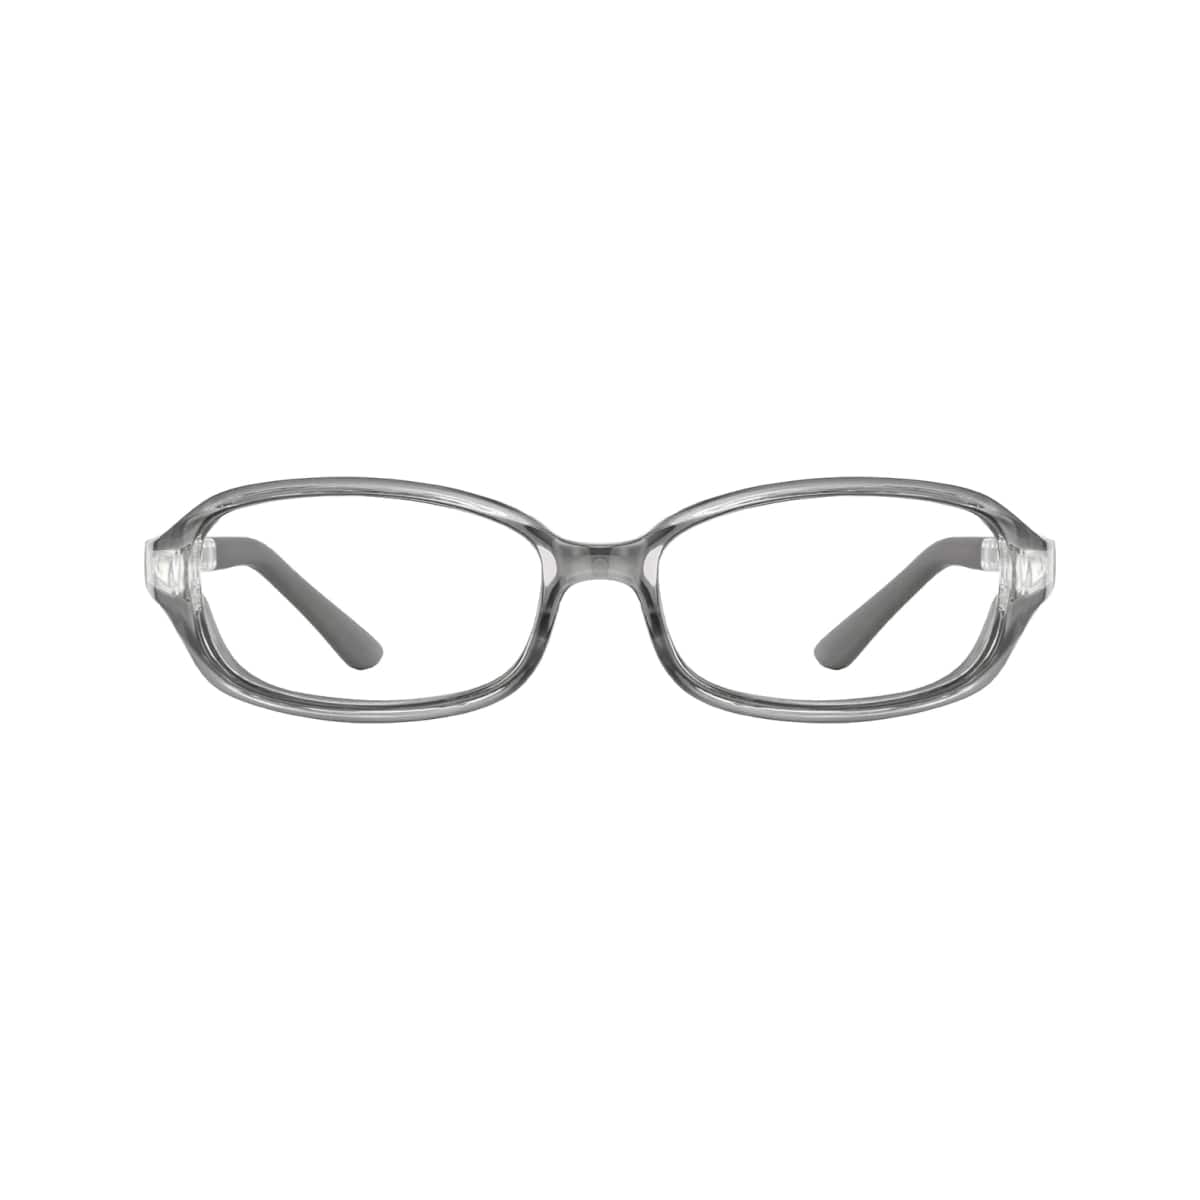 Protective Eyewear. Protects the eyes from dust, pollen, and other particulate matter.